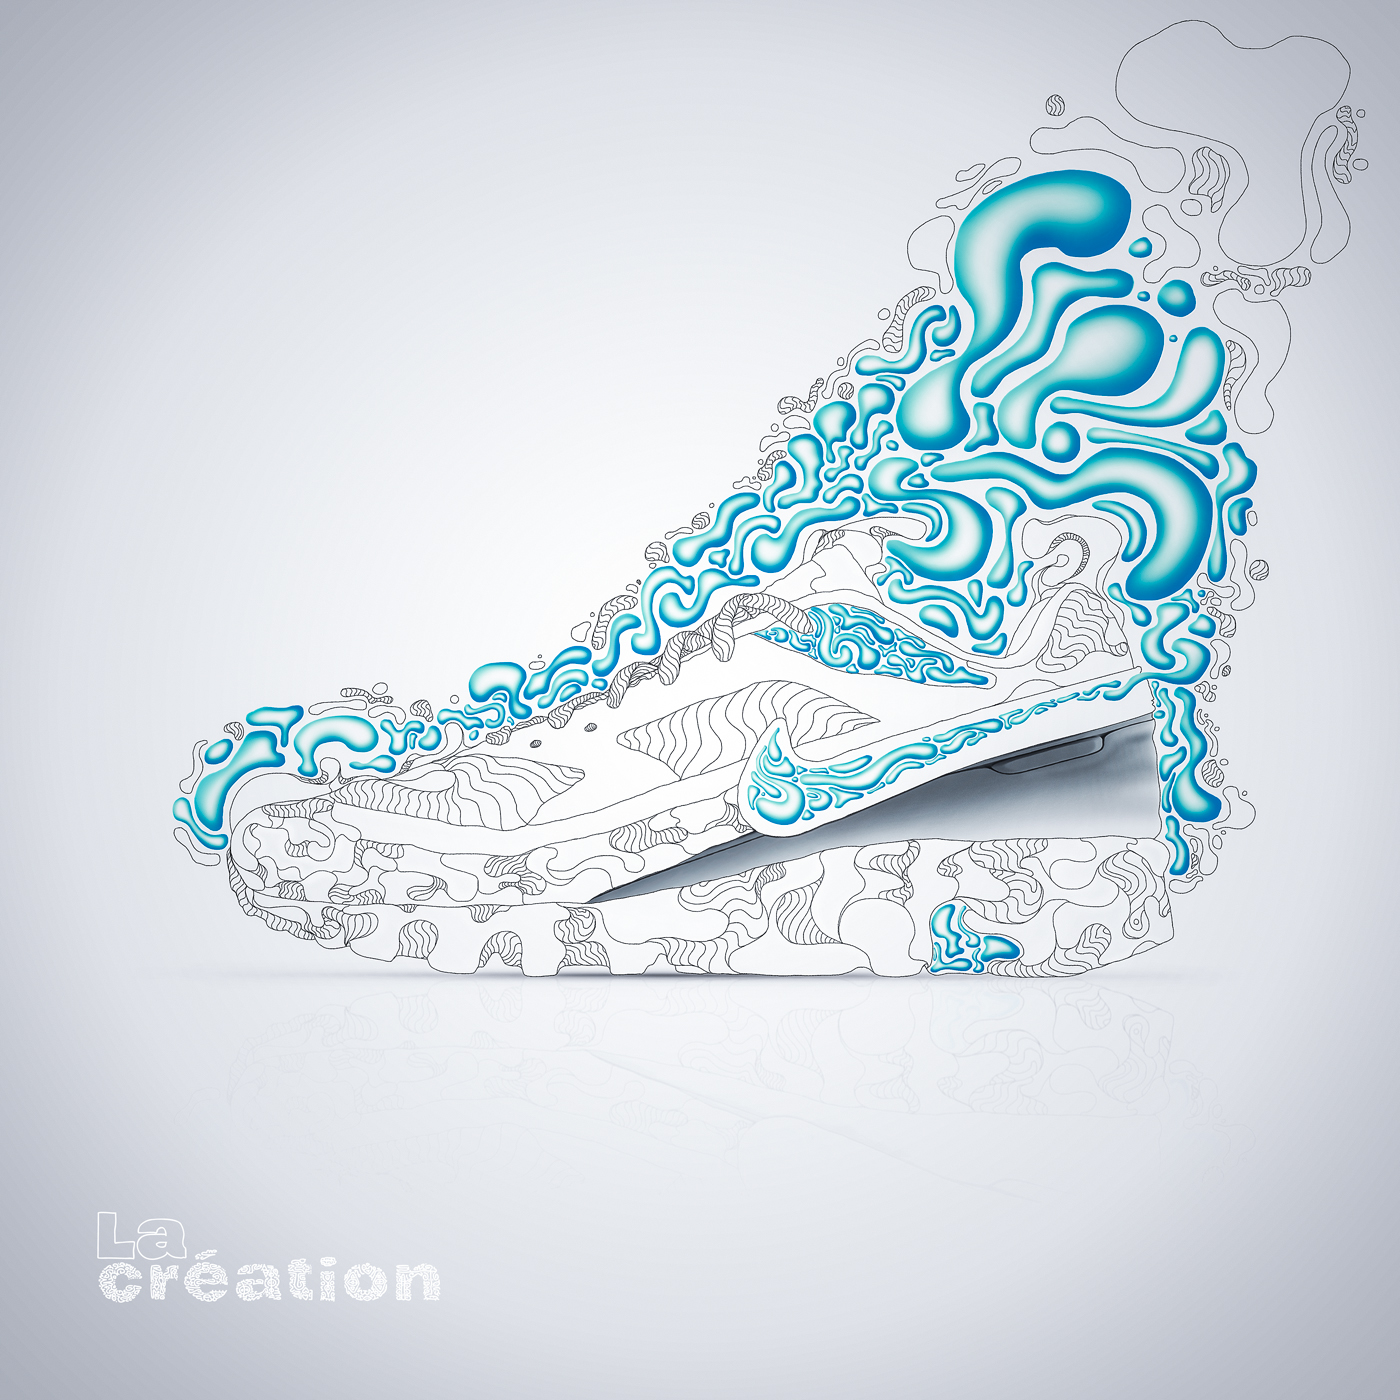 Nike Swoosh surreal abstract design speed apparel